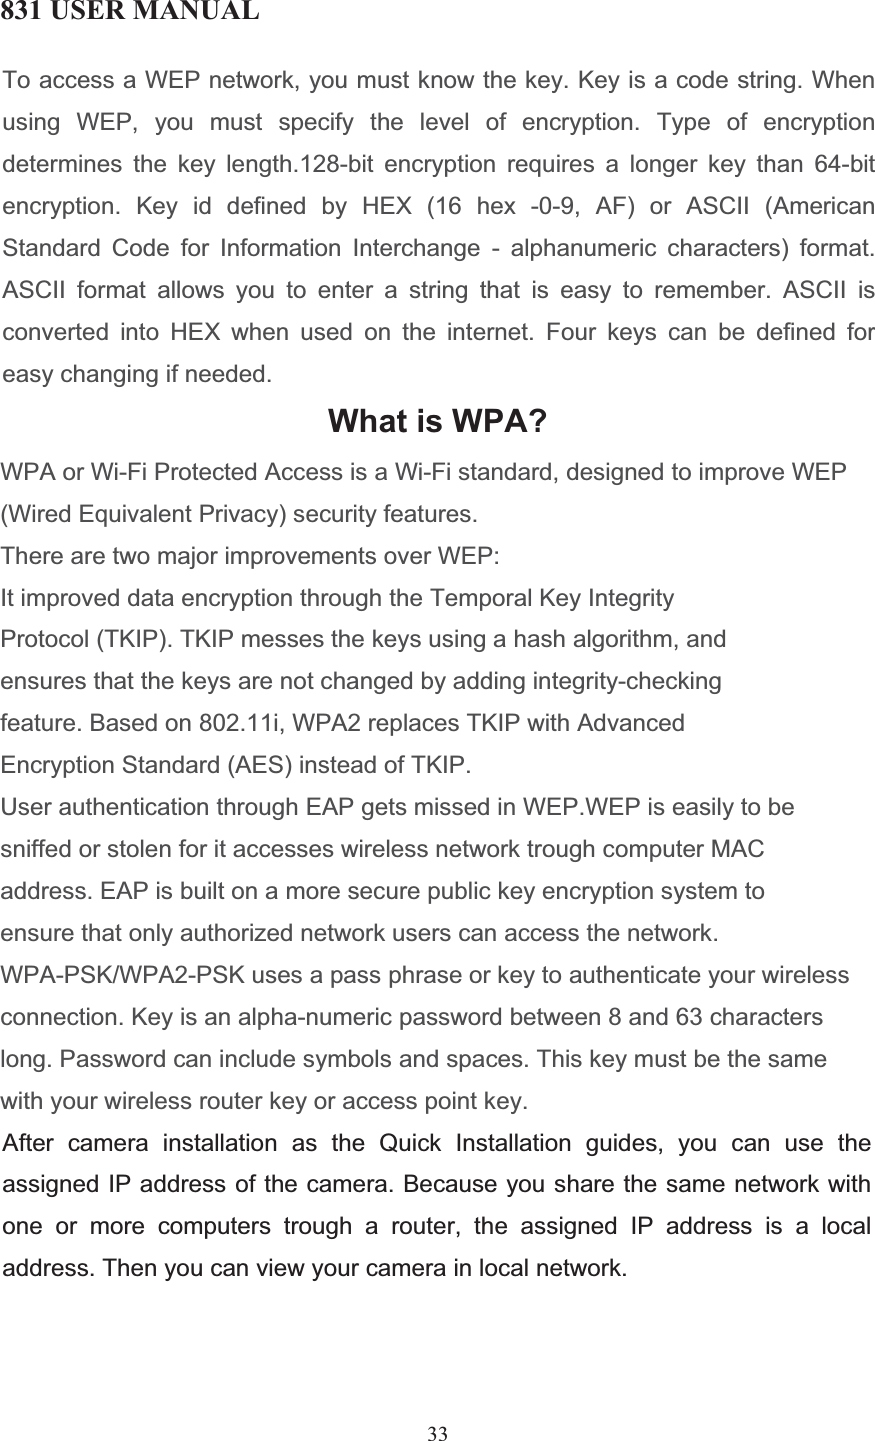 831 USER MANUAL 33 To access a WEP network, you must know the key. Key is a code string. Whenusing WEP, you must specify the level of encryption. Type of encryptiondetermines the key length.128-bit encryption requires a longer key than 64-bit encryption. Key id defined by HEX (16 hex -0-9, AF) or ASCII (American Standard Code for Information Interchange - alphanumeric characters) format. ASCII format allows you to enter a string that is easy to remember. ASCII is converted into HEX when used on the internet. Four keys can be defined for easy changing if needed.What is WPA?WPA or Wi-Fi Protected Access is a Wi-Fi standard, designed to improve WEP (Wired Equivalent Privacy) security features.There are two major improvements over WEP:It improved data encryption through the Temporal Key Integrity Protocol (TKIP). TKIP messes the keys using a hash algorithm, and ensures that the keys are not changed by adding integrity-checking feature. Based on 802.11i, WPA2 replaces TKIP with Advanced Encryption Standard (AES) instead of TKIP.User authentication through EAP gets missed in WEP.WEP is easily to be sniffed or stolen for it accesses wireless network trough computer MAC address. EAP is built on a more secure public key encryption system to ensure that only authorized network users can access the network.WPA-PSK/WPA2-PSK uses a pass phrase or key to authenticate your wireless connection. Key is an alpha-numeric password between 8 and 63 characters long. Password can include symbols and spaces. This key must be the same with your wireless router key or access point key.  After camera installation as the Quick Installation guides, you can use the assigned IP address of the camera. Because you share the same network with one or more computers trough a router, the assigned IP address is a local address. Then you can view your camera in local network. 